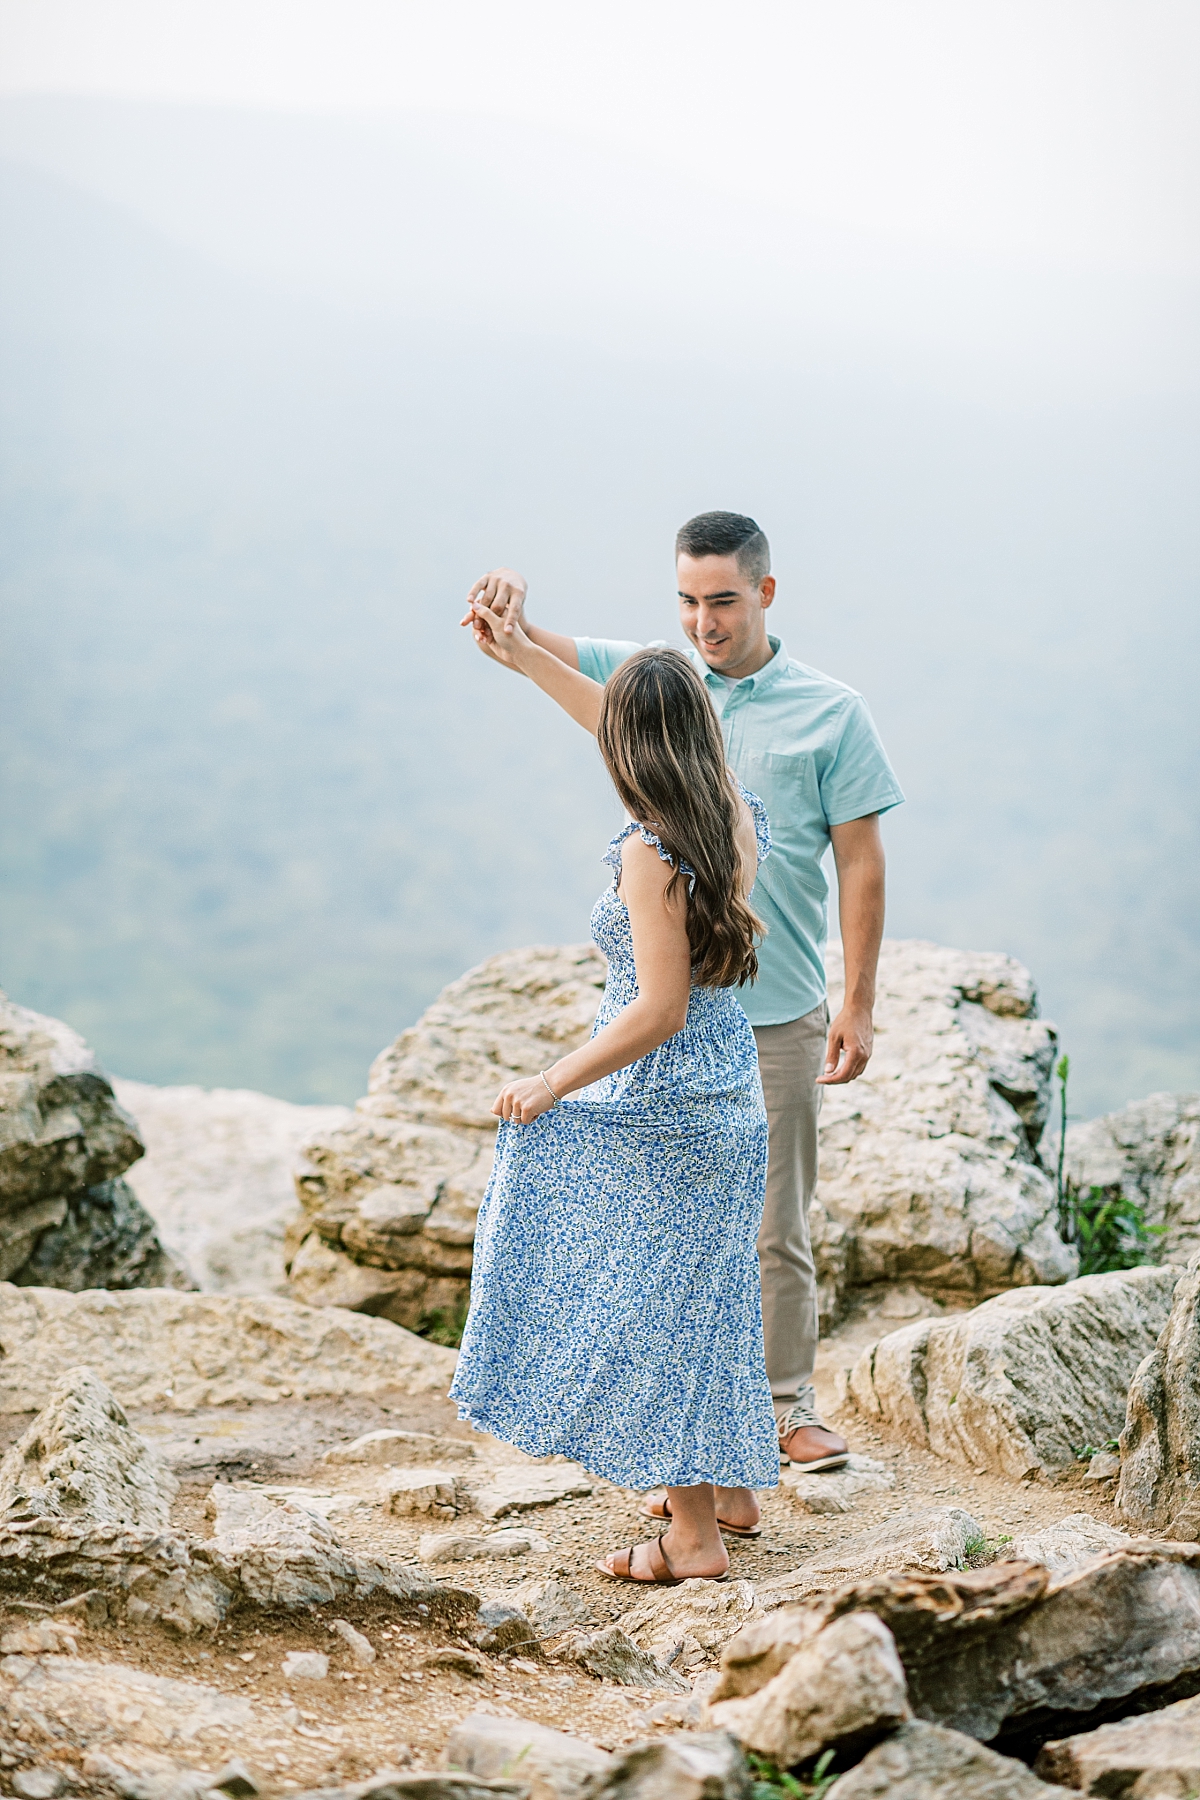 Engagement photo of a couple at Hawk Mountain Sanctuary in PA. The couple twirls on rocks with a beautiful view